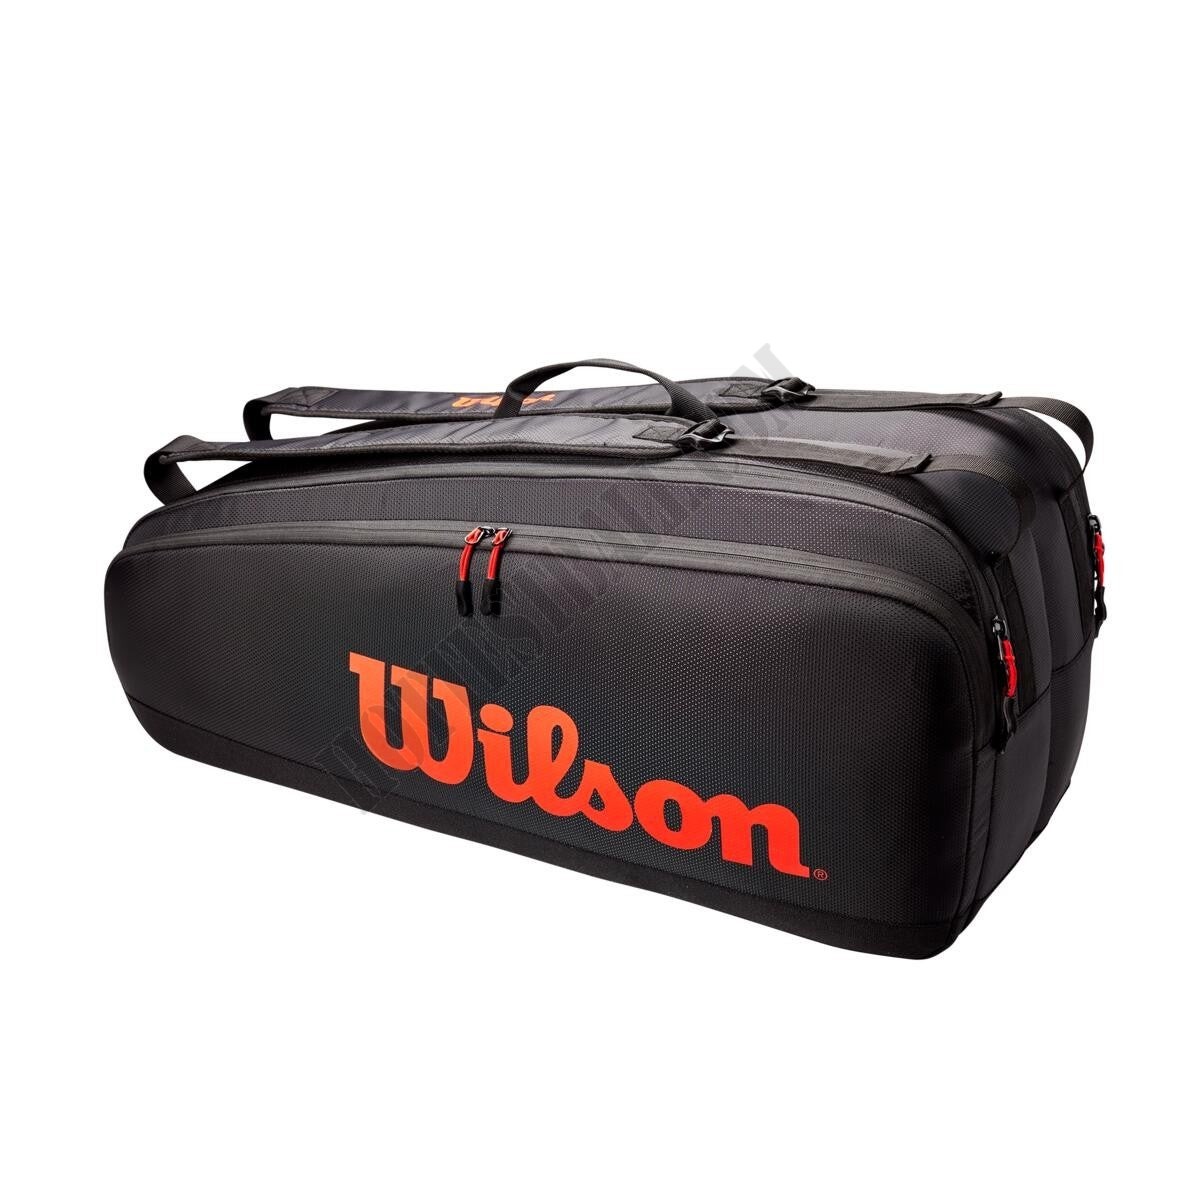 Tour 6 Pack Bag - Wilson Discount Store - Tour 6 Pack Bag - Wilson Discount Store